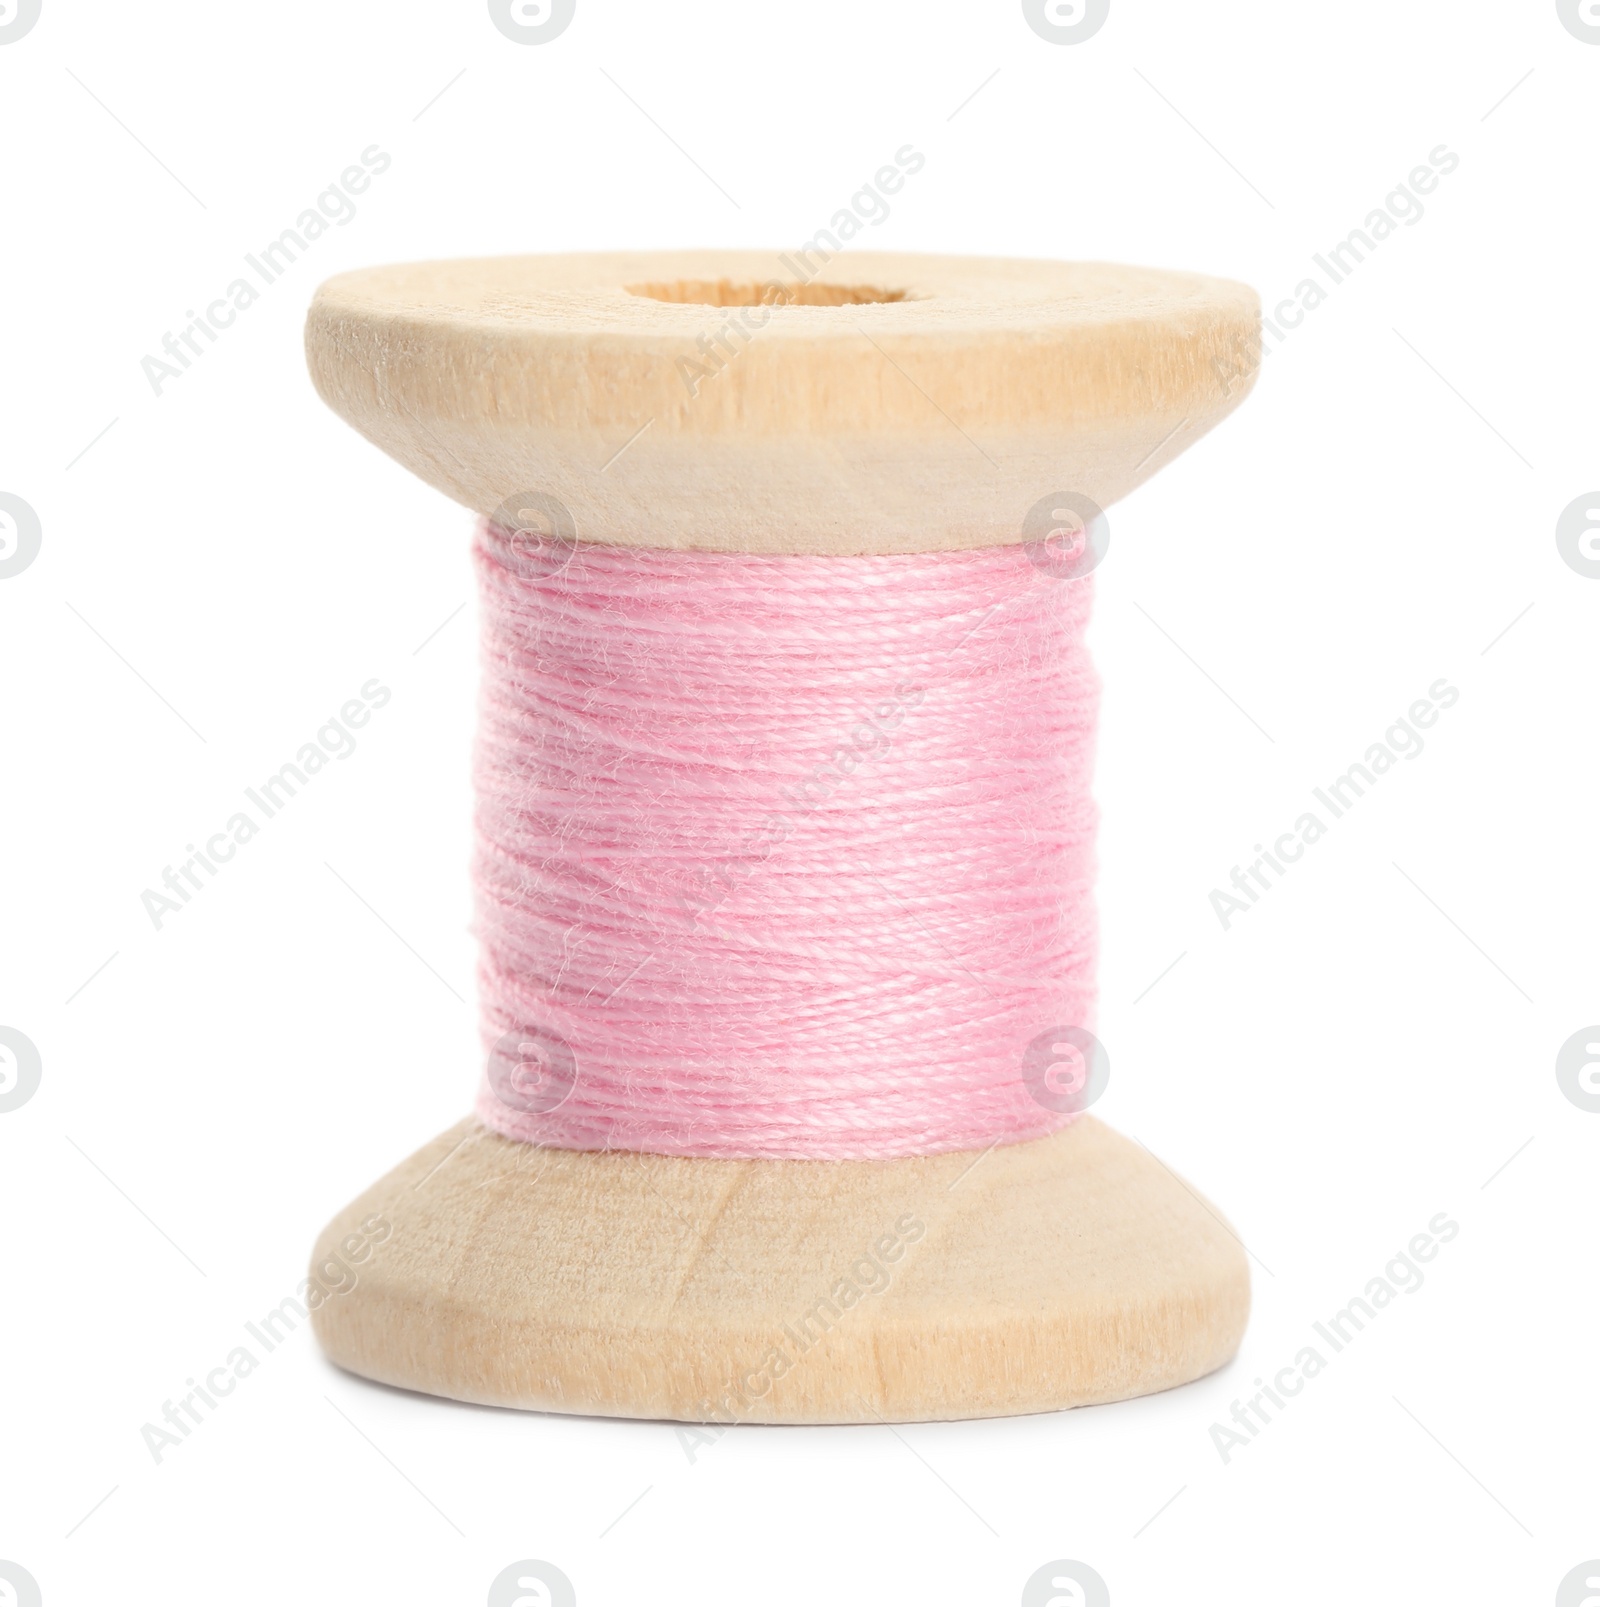 Photo of Wooden spool of pink sewing thread isolated on white